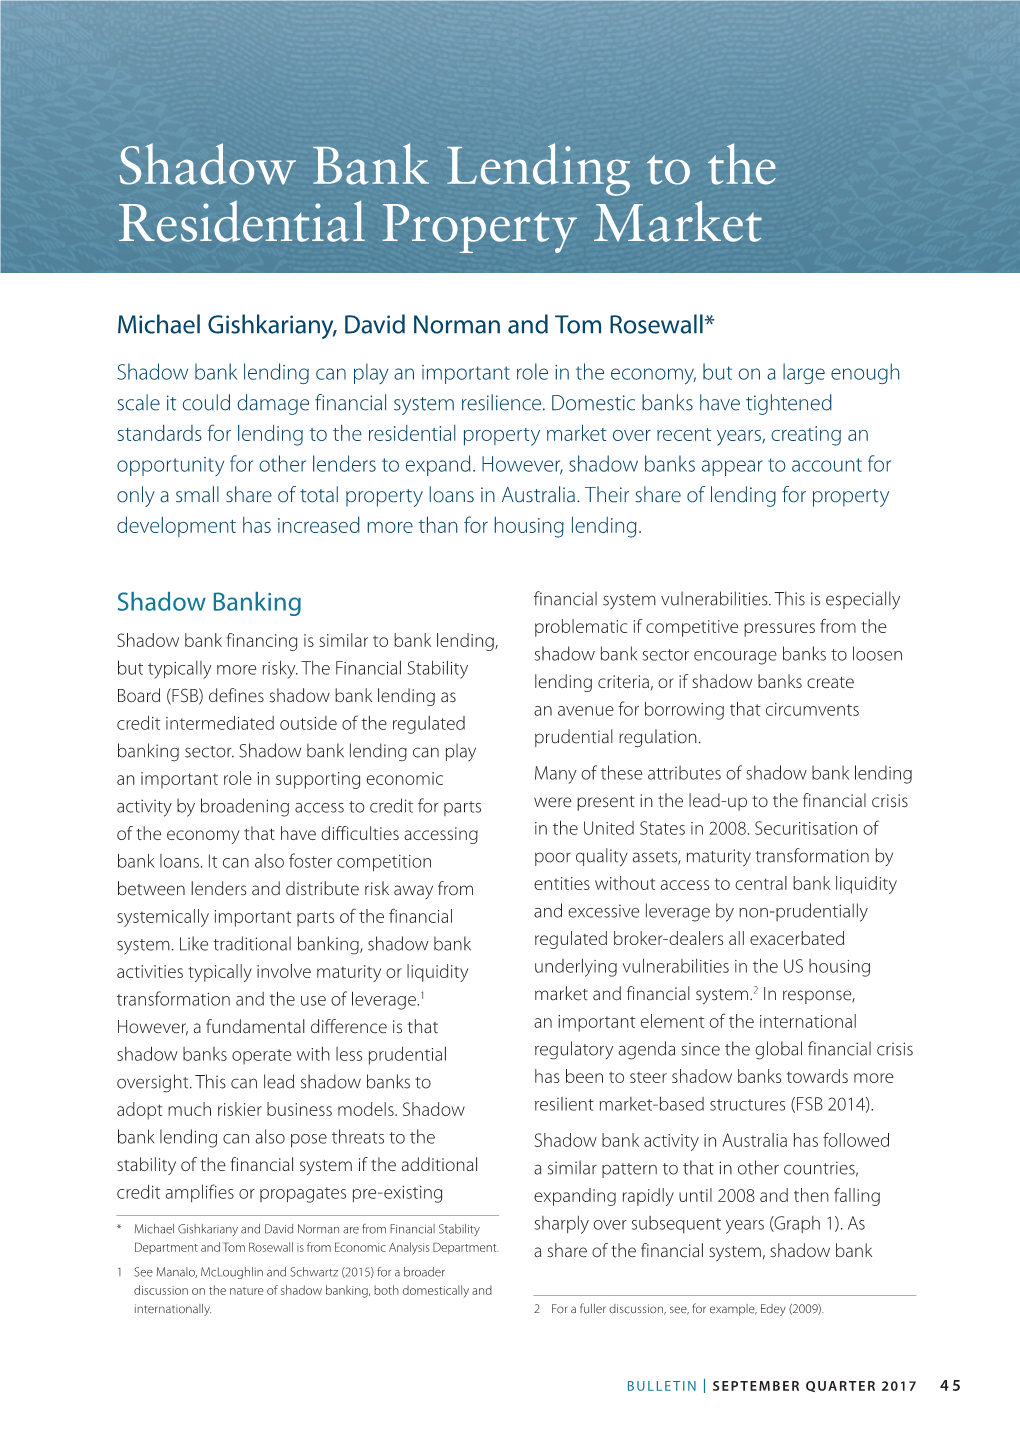 Shadow Bank Lending to the Residential Property Market